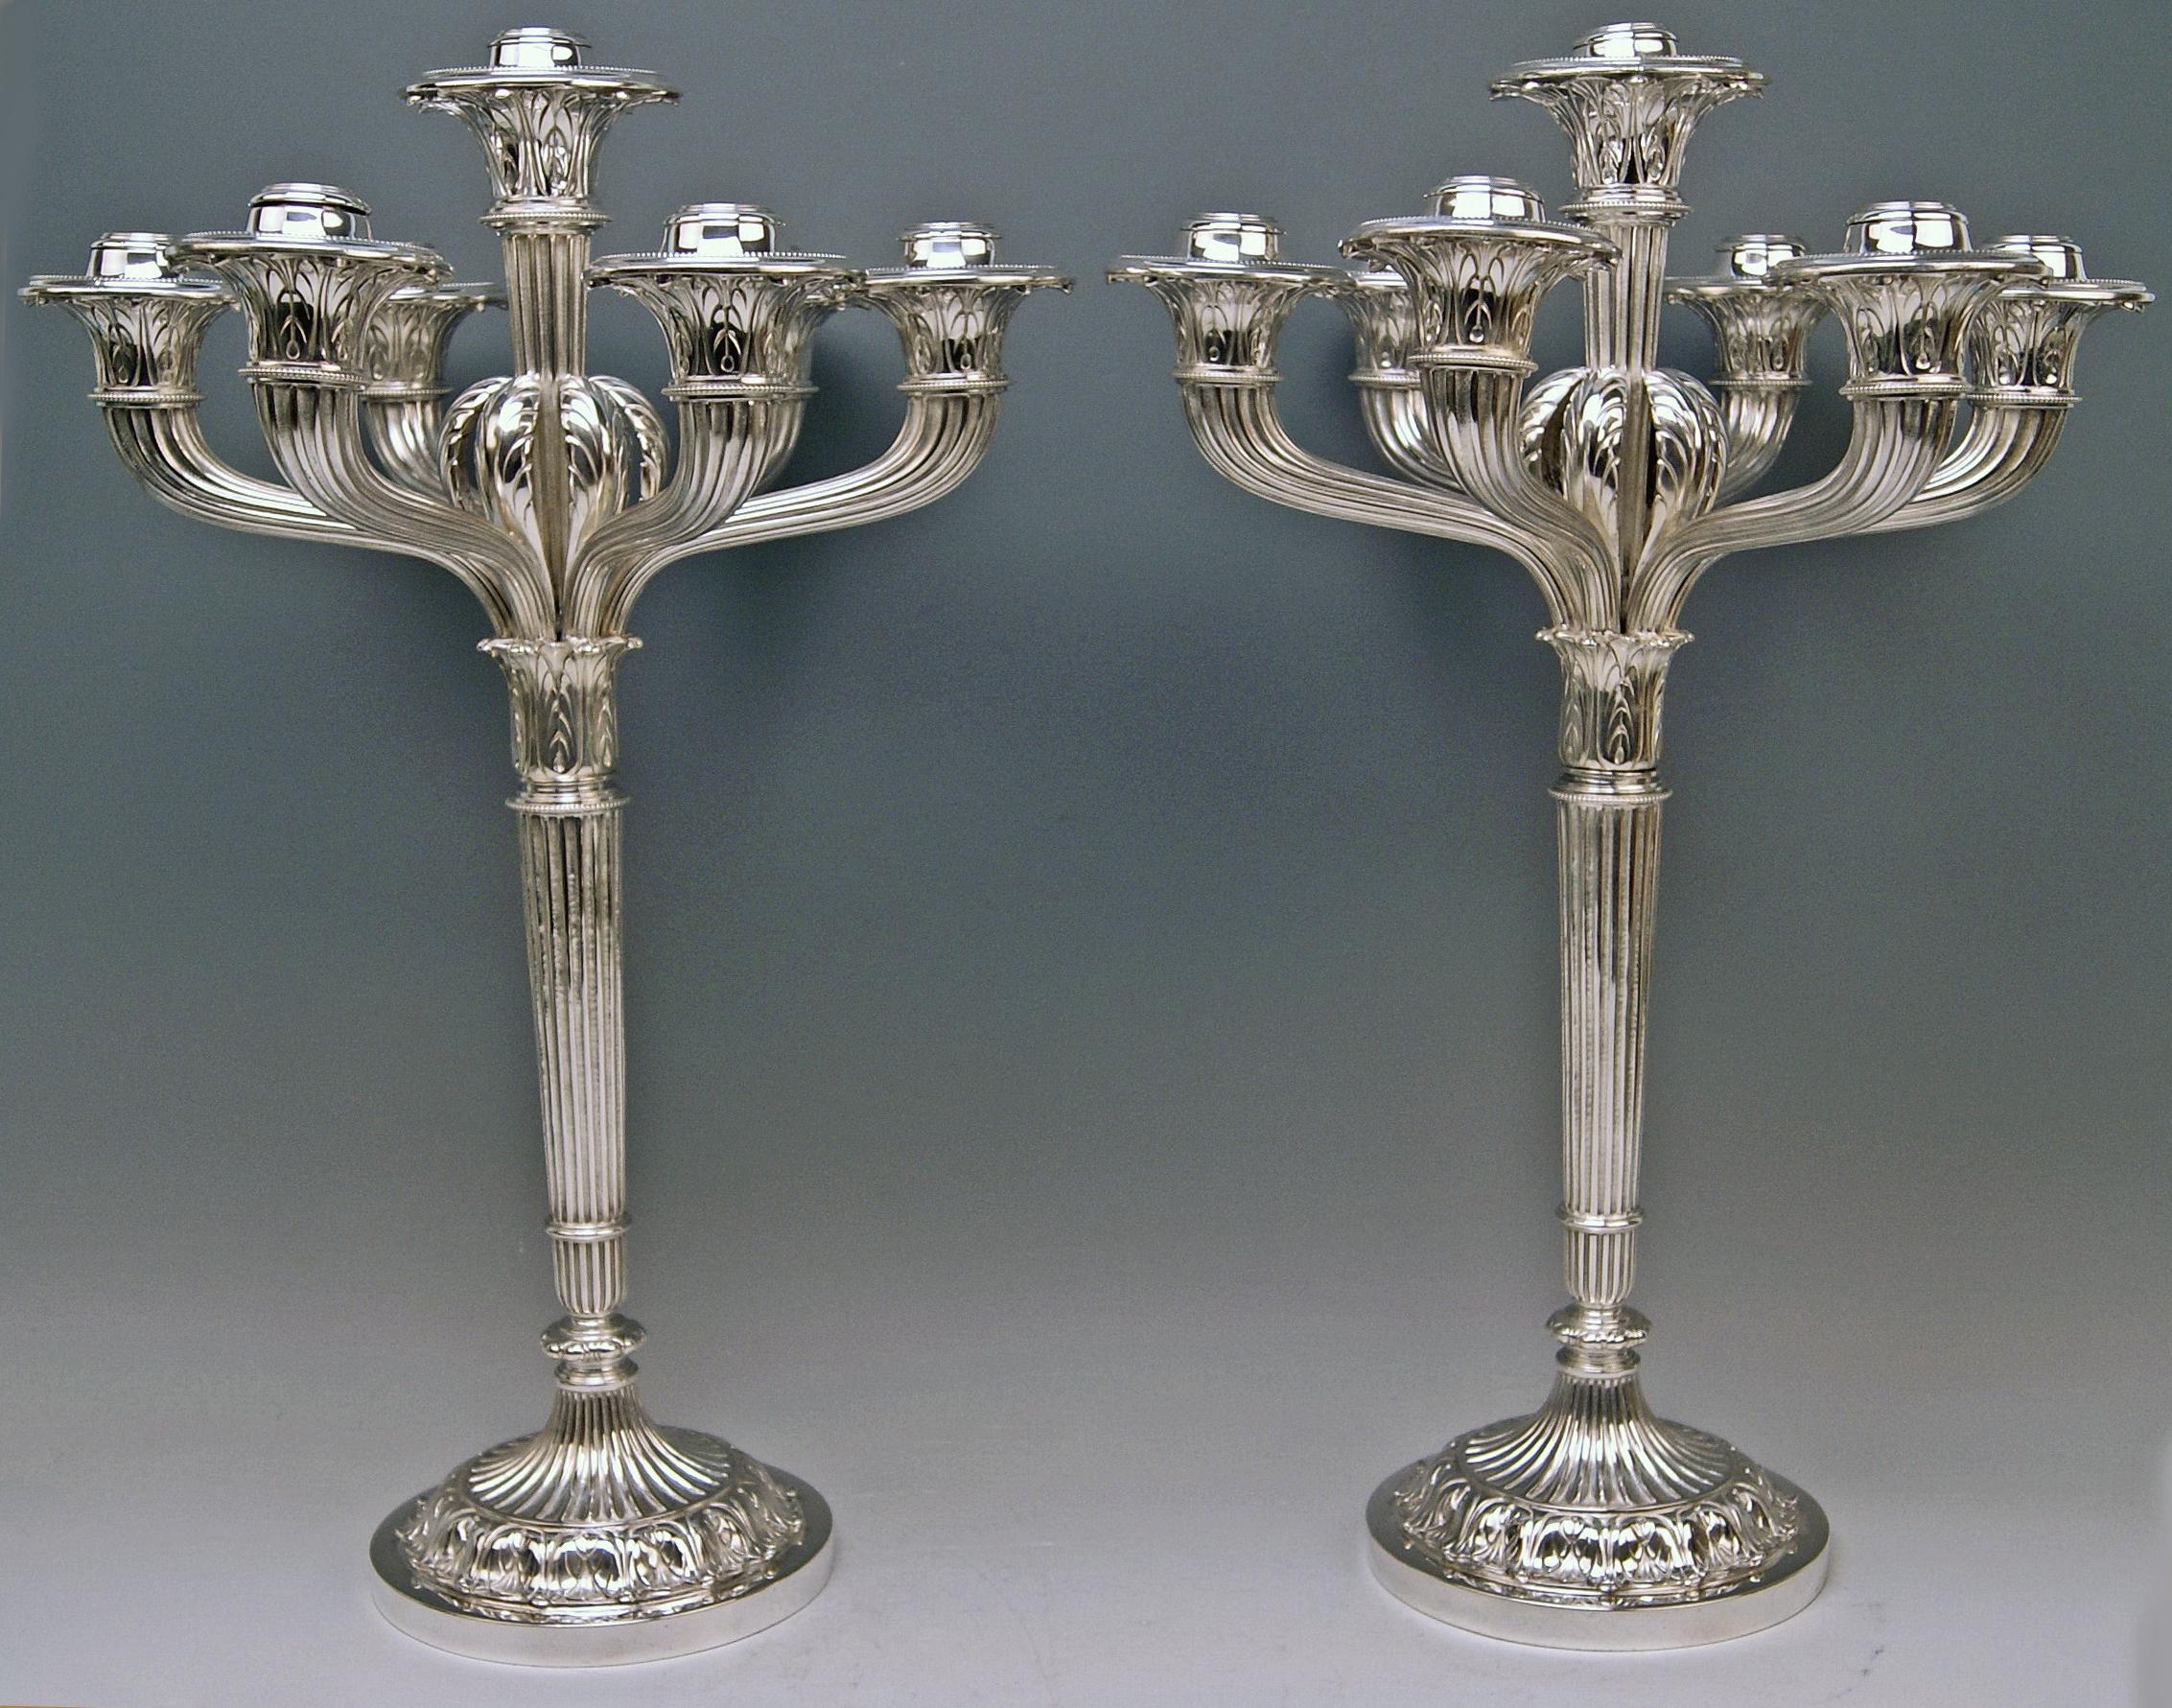 Silver huge pair of candlesticks, made by Bruckmann & Sons (Germany / Heilbronn).

Historicism Period (made circa 1882 - 85)
Hallmarked SILVER '800'
Manufactory: 
Marked by Eagle Sign of Bruckmann & Soehne (= SONS), Heilbronn (Germany) /